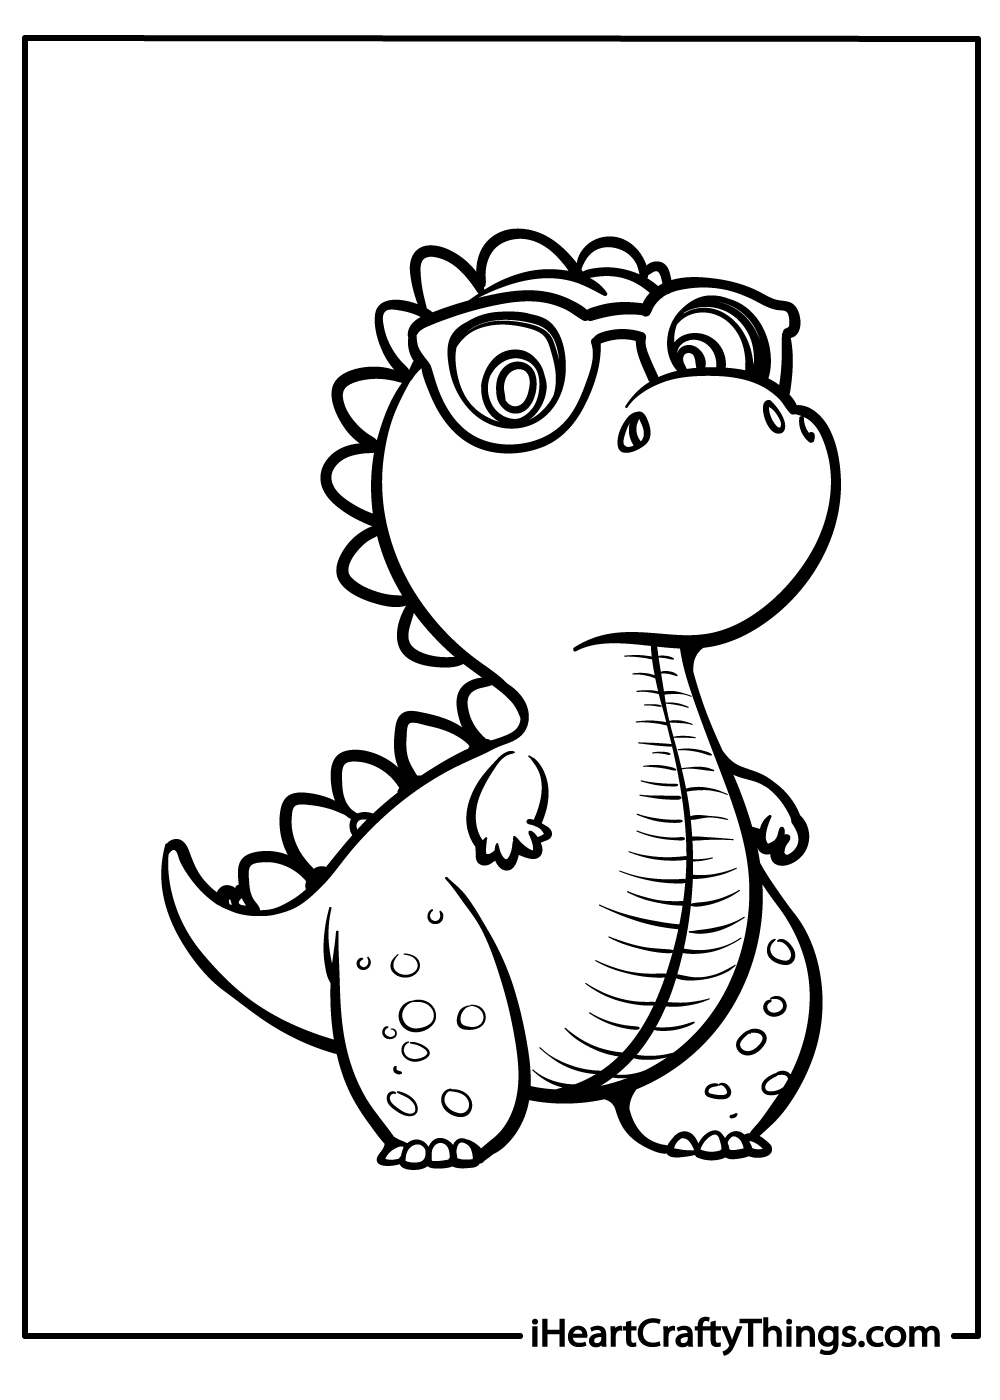 a dinosaur with glasses coloring